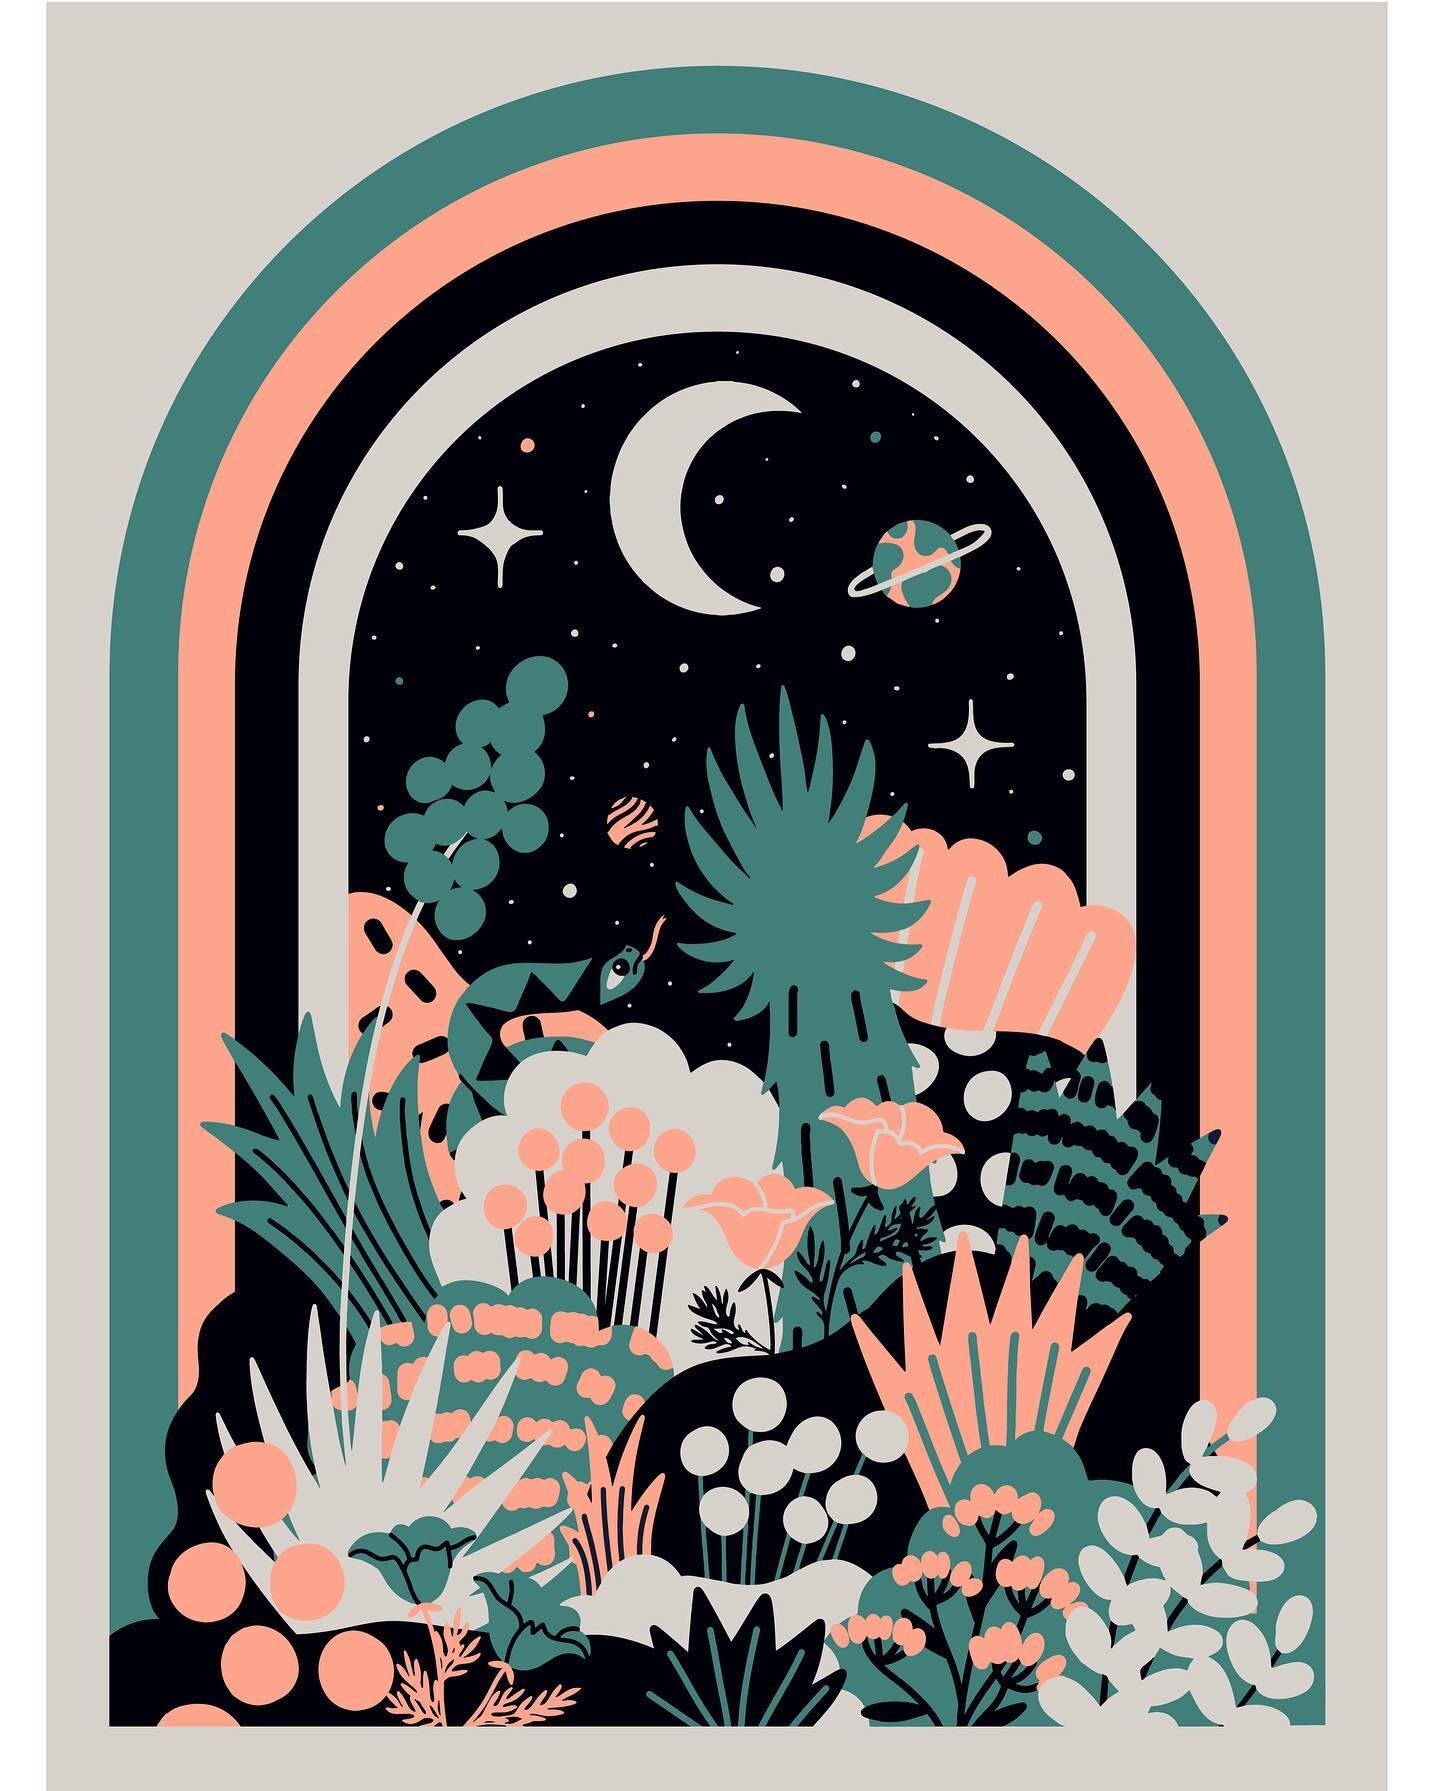 As part of my collaboration with @acehotelpalmsprings, we created a limited edition print based loosely on the mural I painted. 

I incorporated several of the same elements as the mural, but in a different layout and limited color scheme.

This 18x2